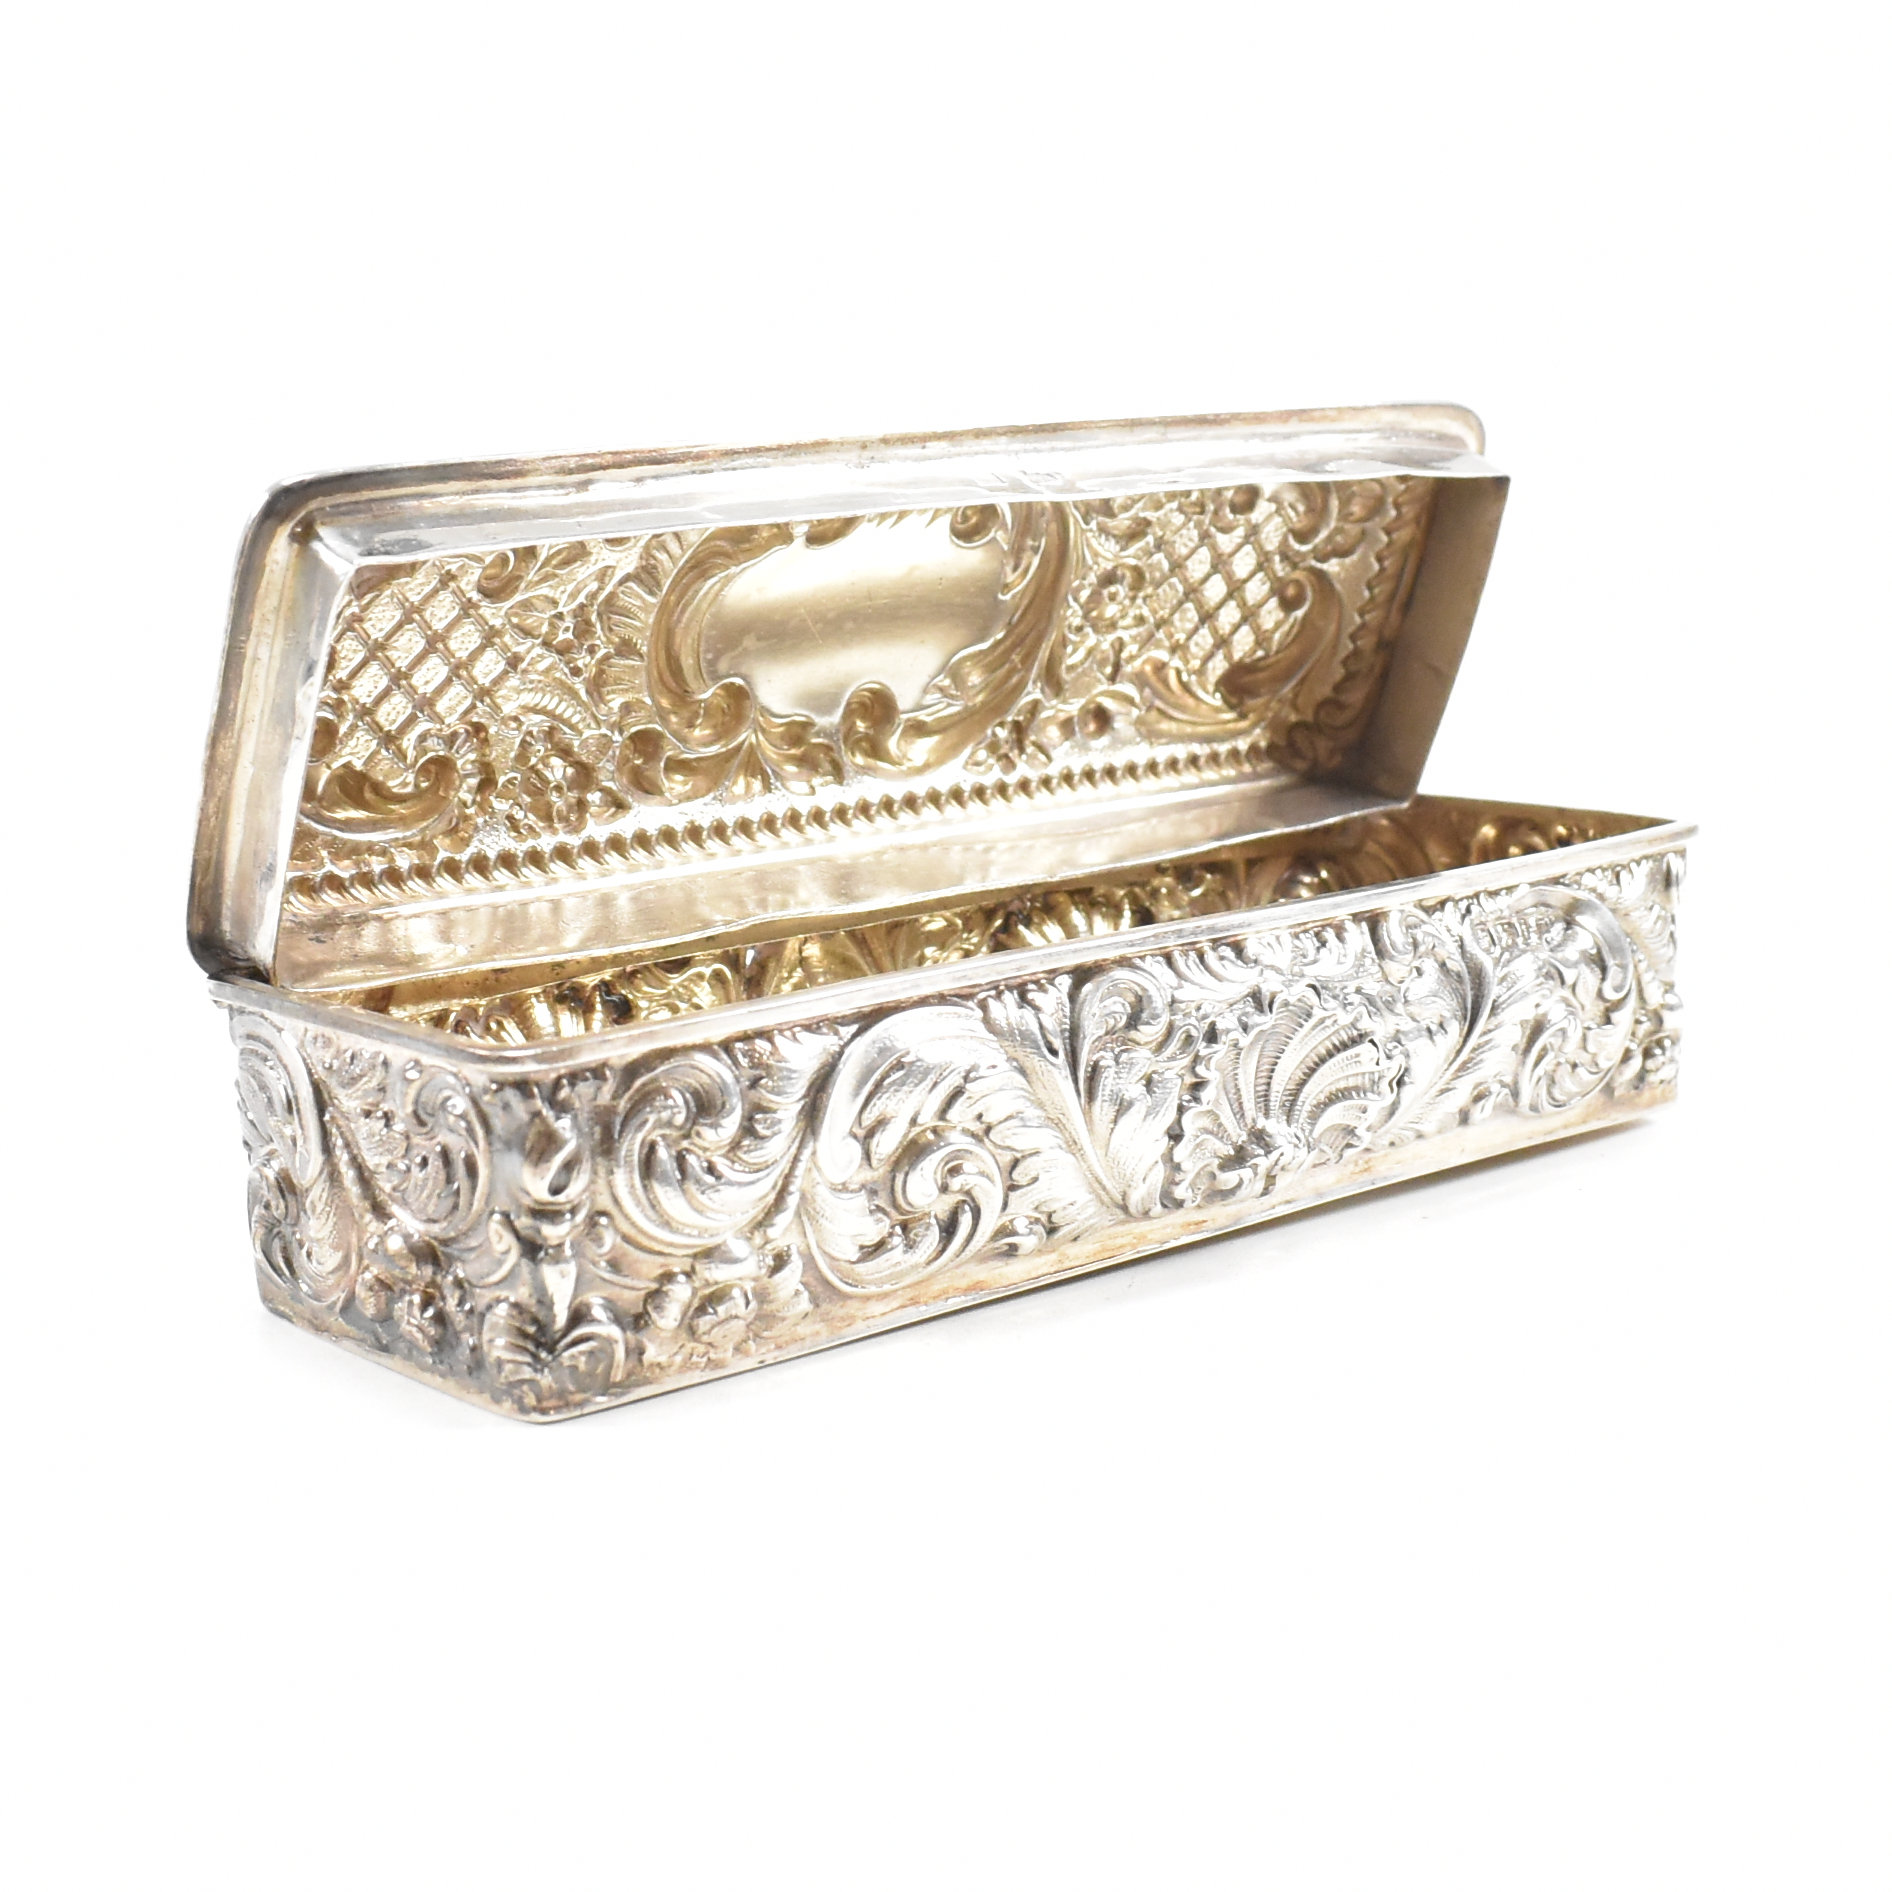 VICTORIAN HALLMARKED SILVER BOX BY WALKER & HALL - Image 3 of 9